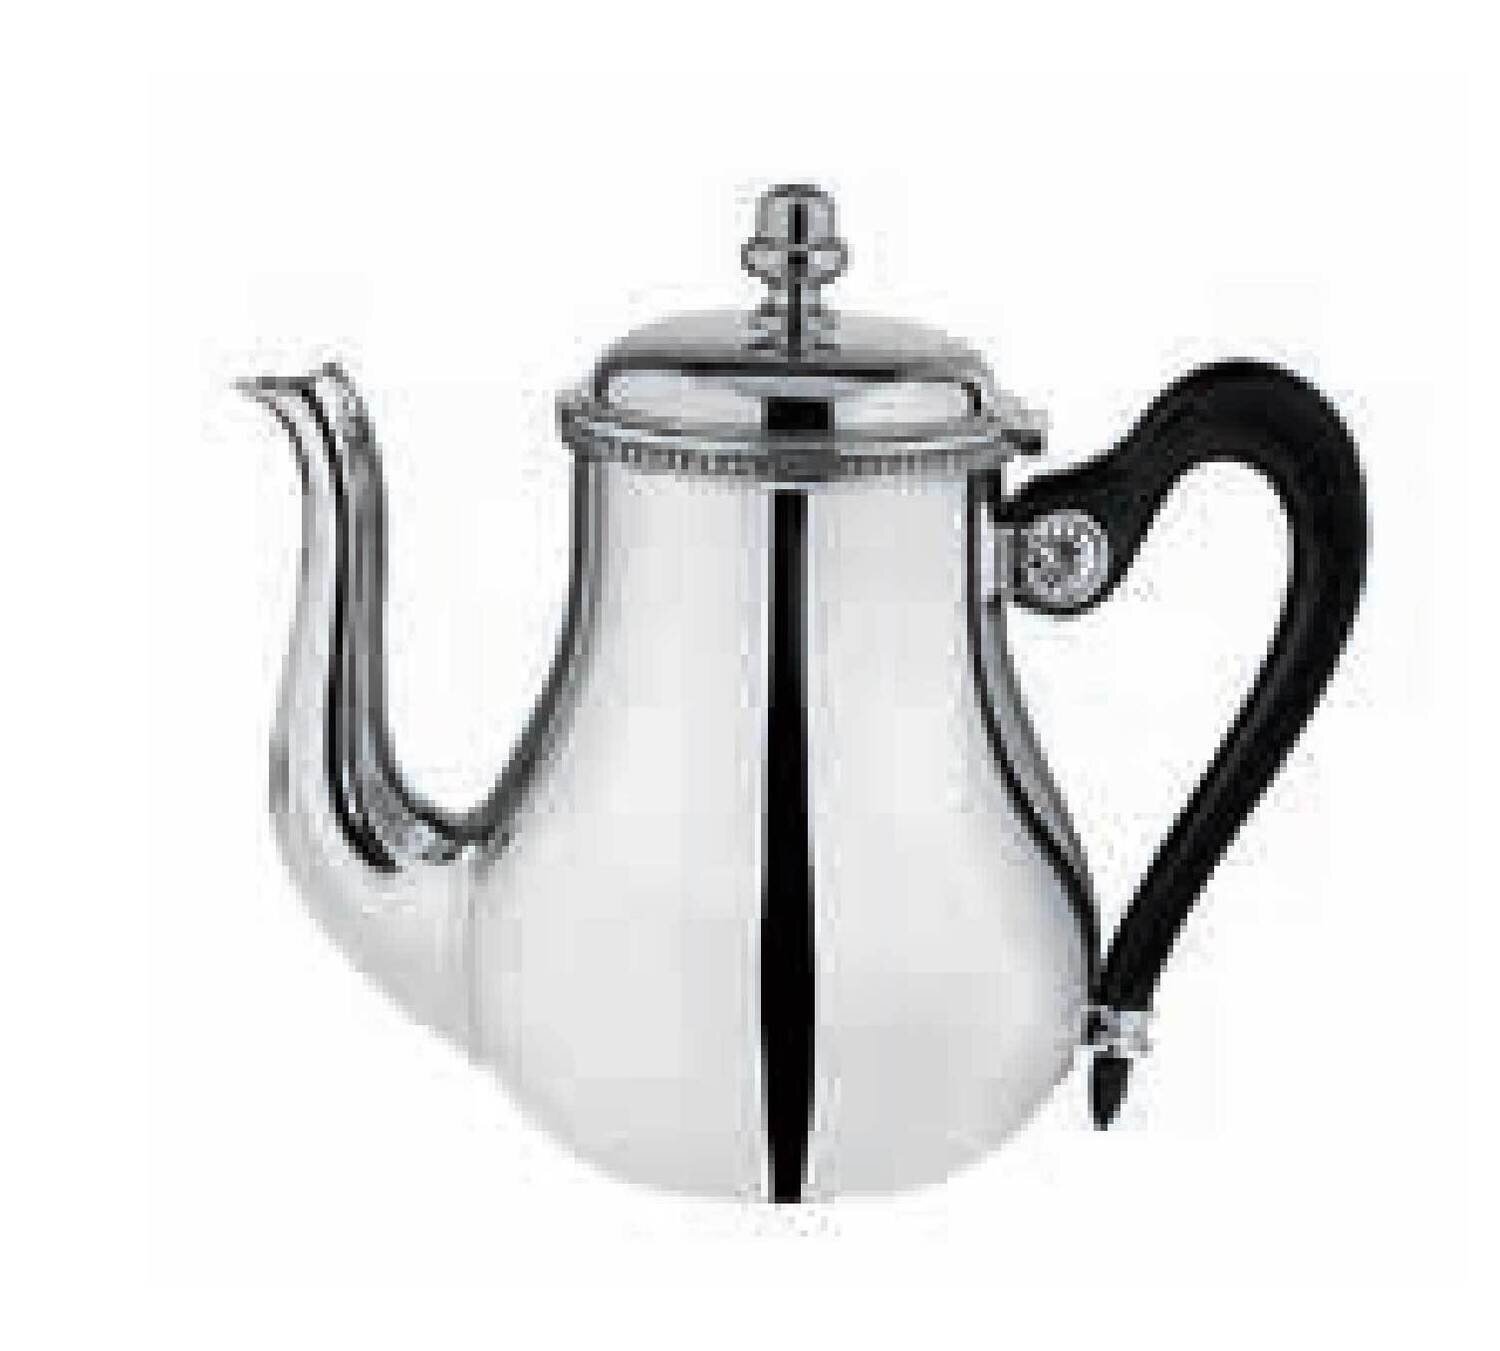 Ercuis Lauriers Tea Pot 7.5 Inch Silver Plated F51L056-11